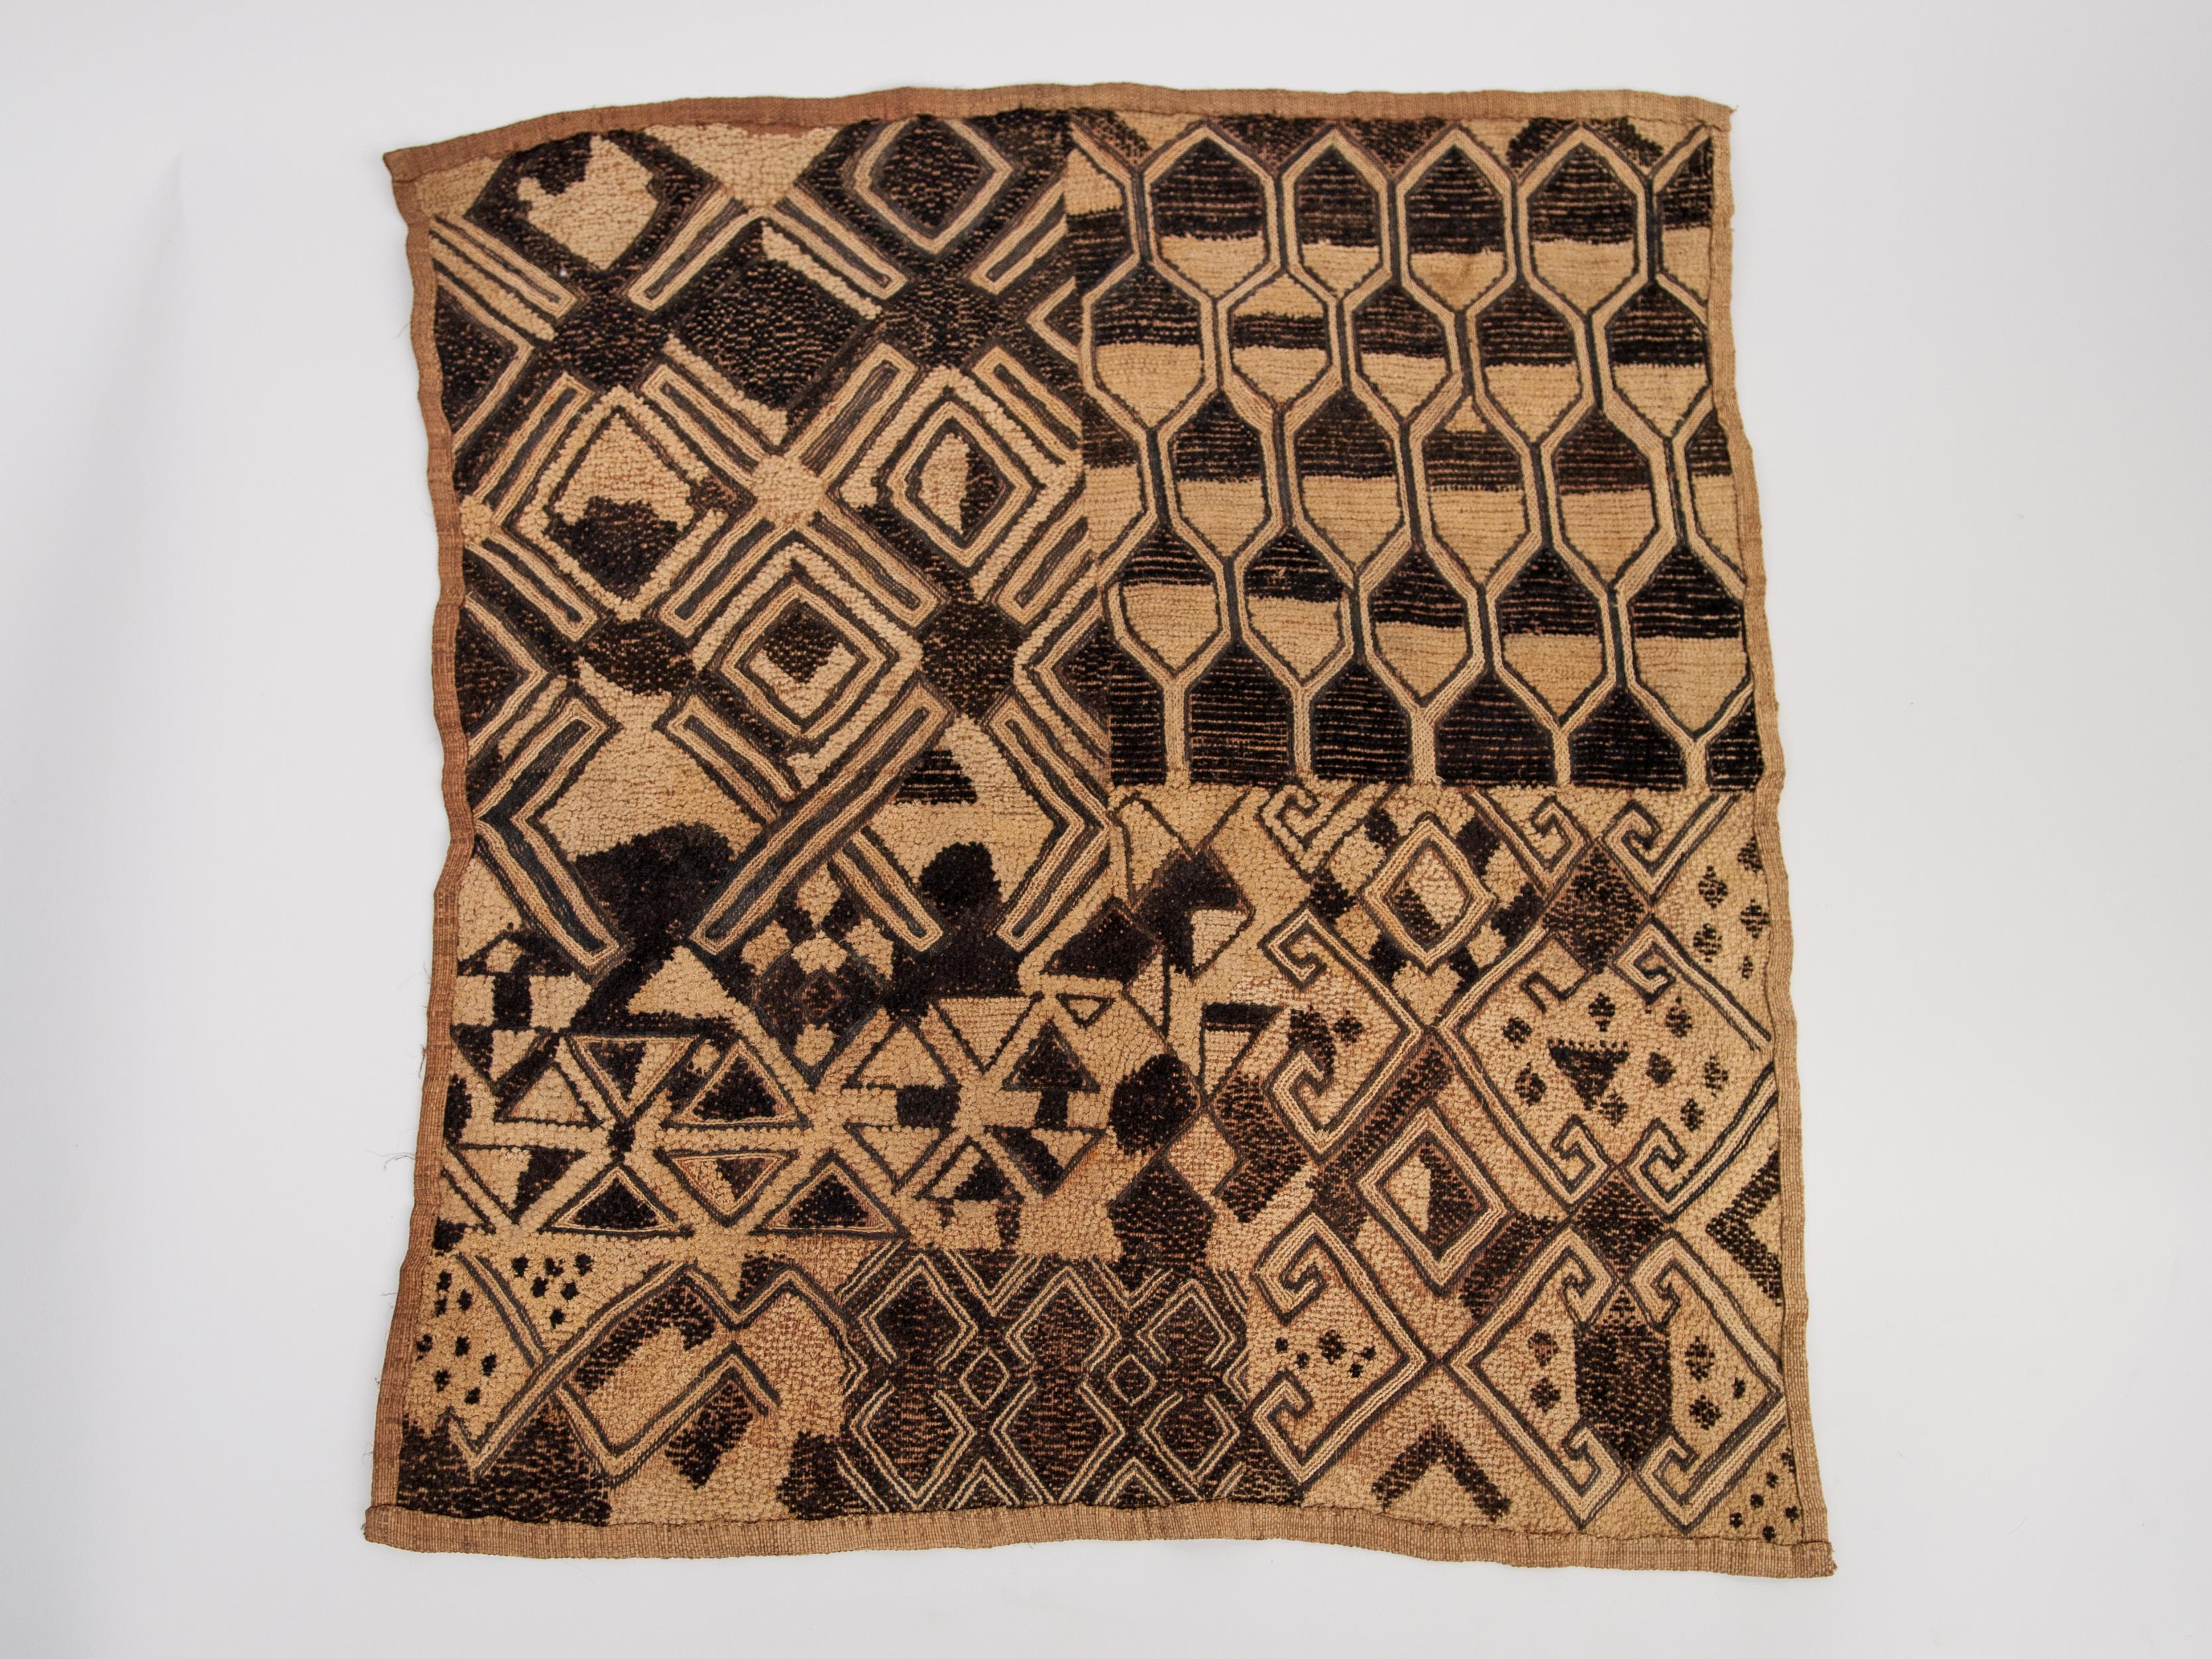 Vintage Kuba textile panel. Handwoven and hand embroidered raffia palm fibre. From the Kuba people of the Democratic Republic of the Congo (formerly Zaire), mid-20th century.
Offered by Bruce Hughes.
Panels like this were worn by women on